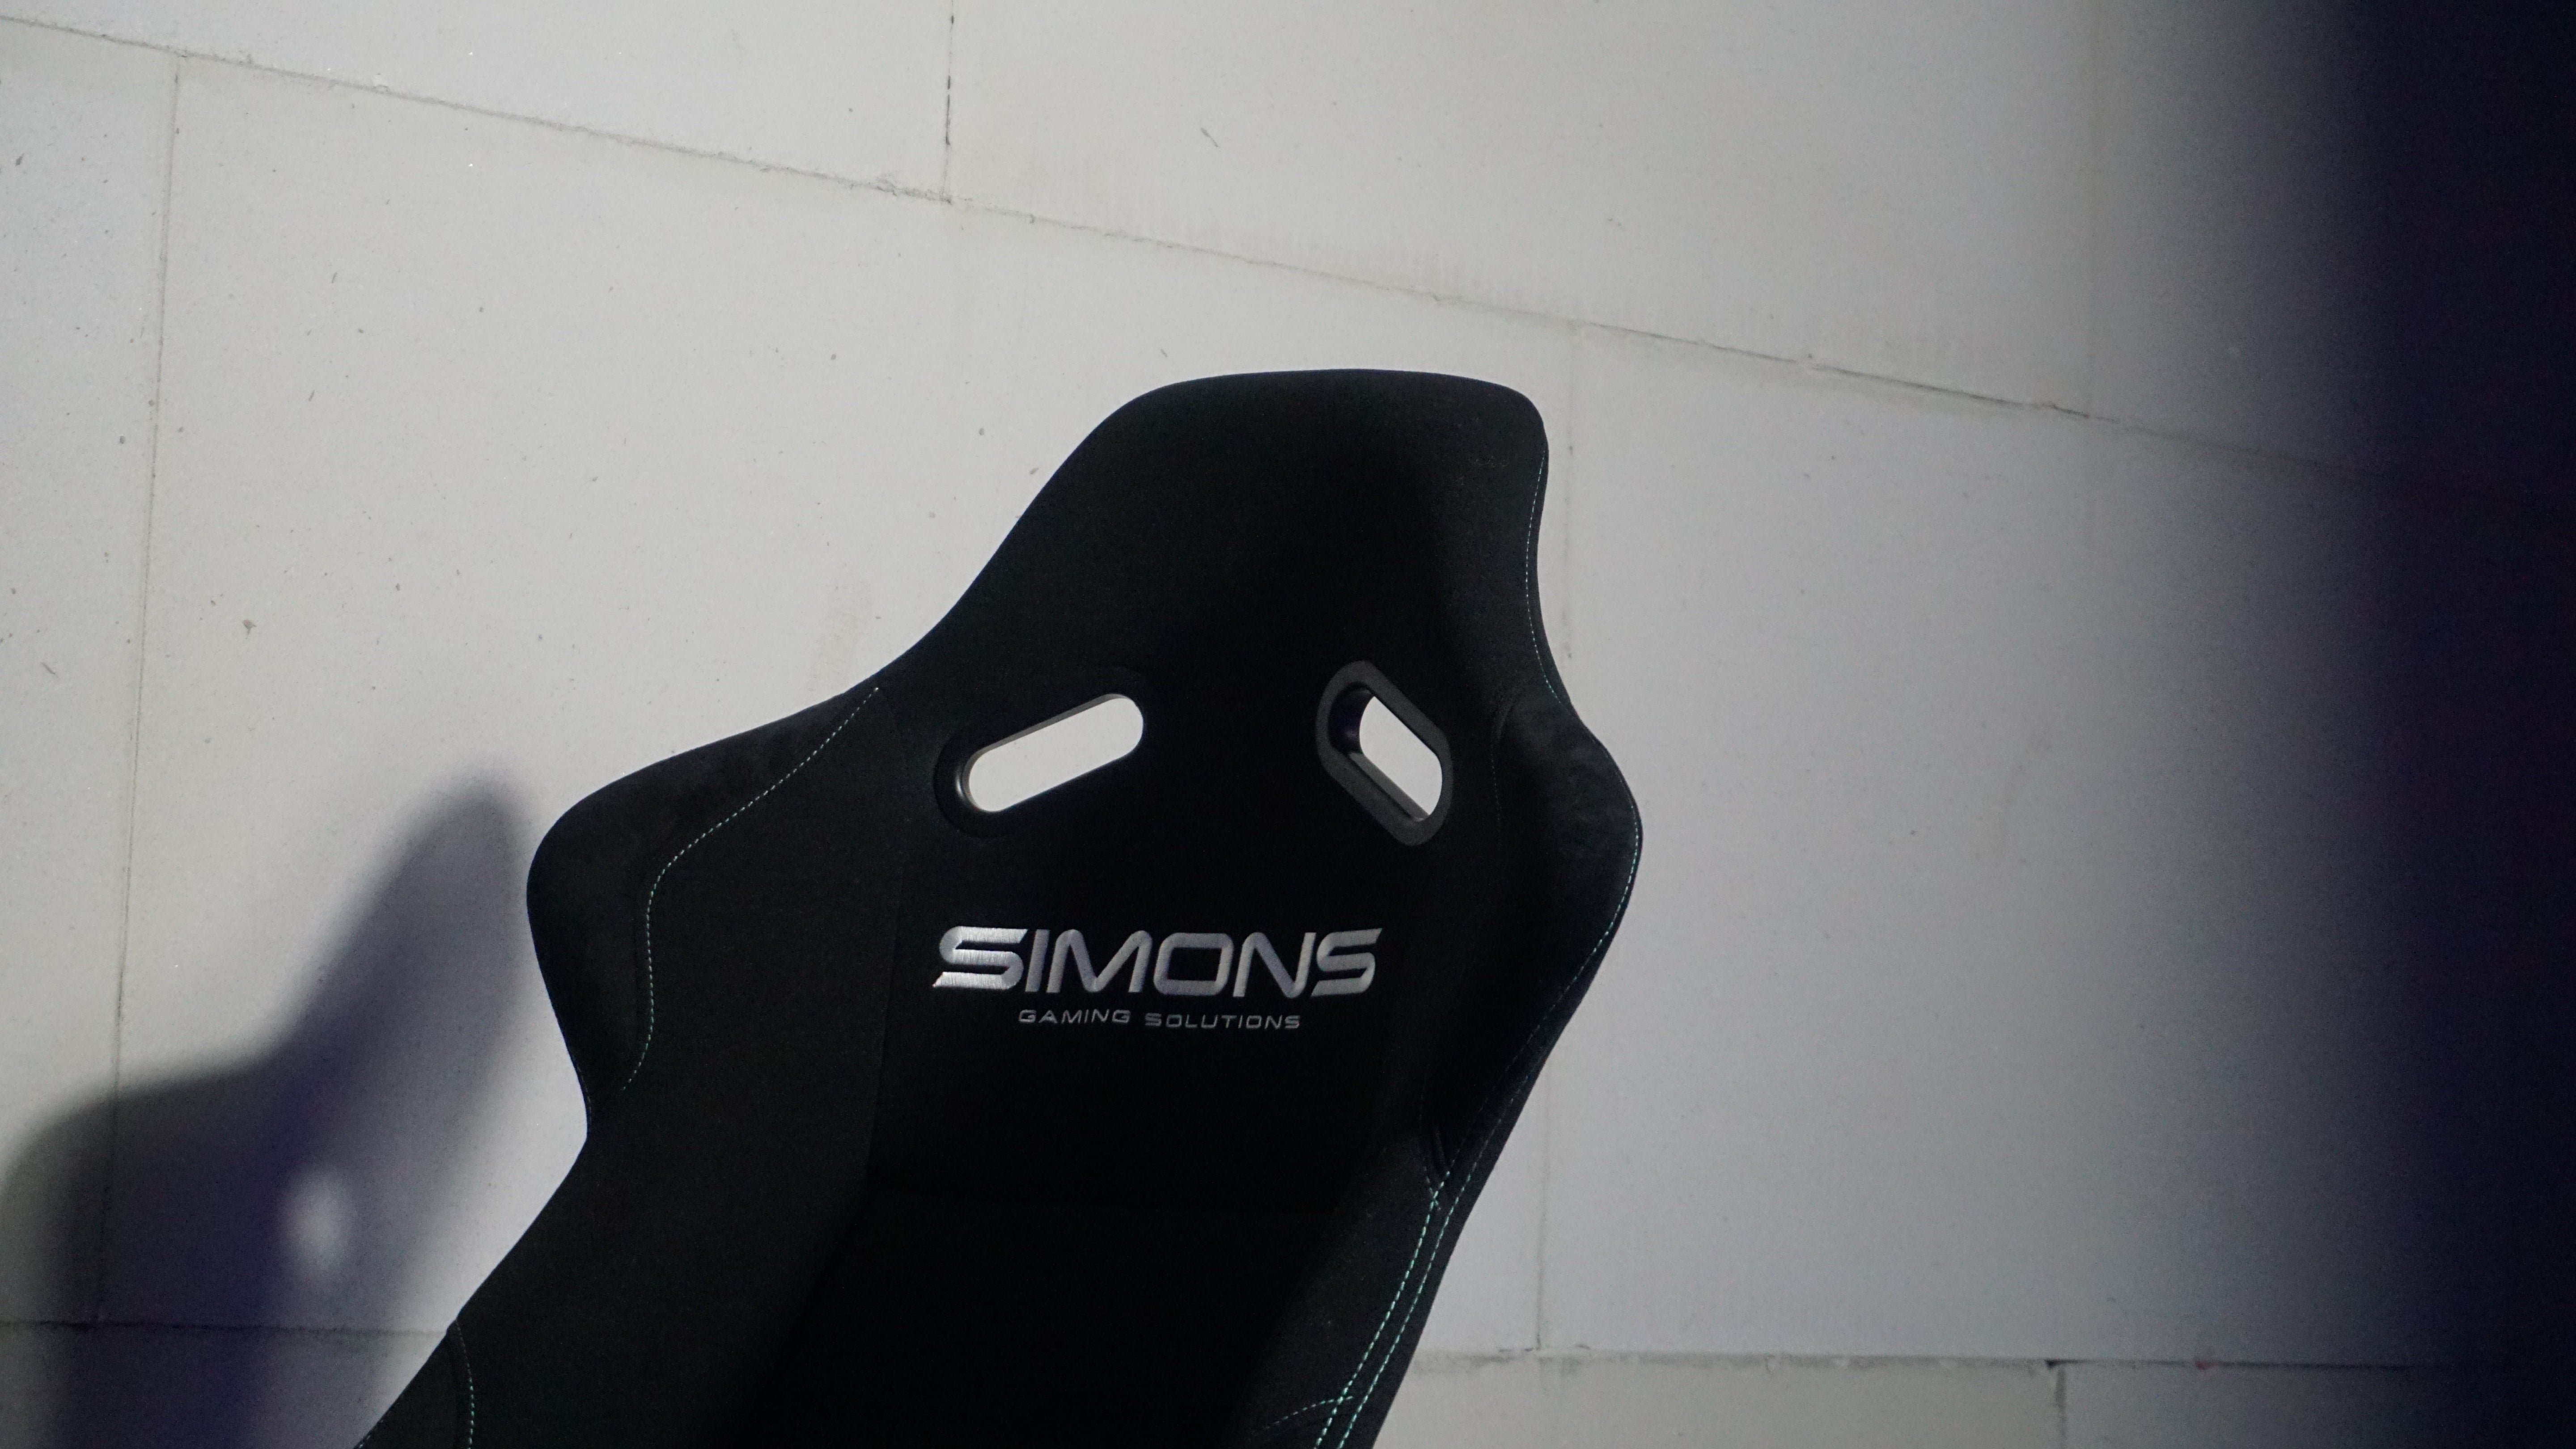 Simons Gaming Solutions S1 seat